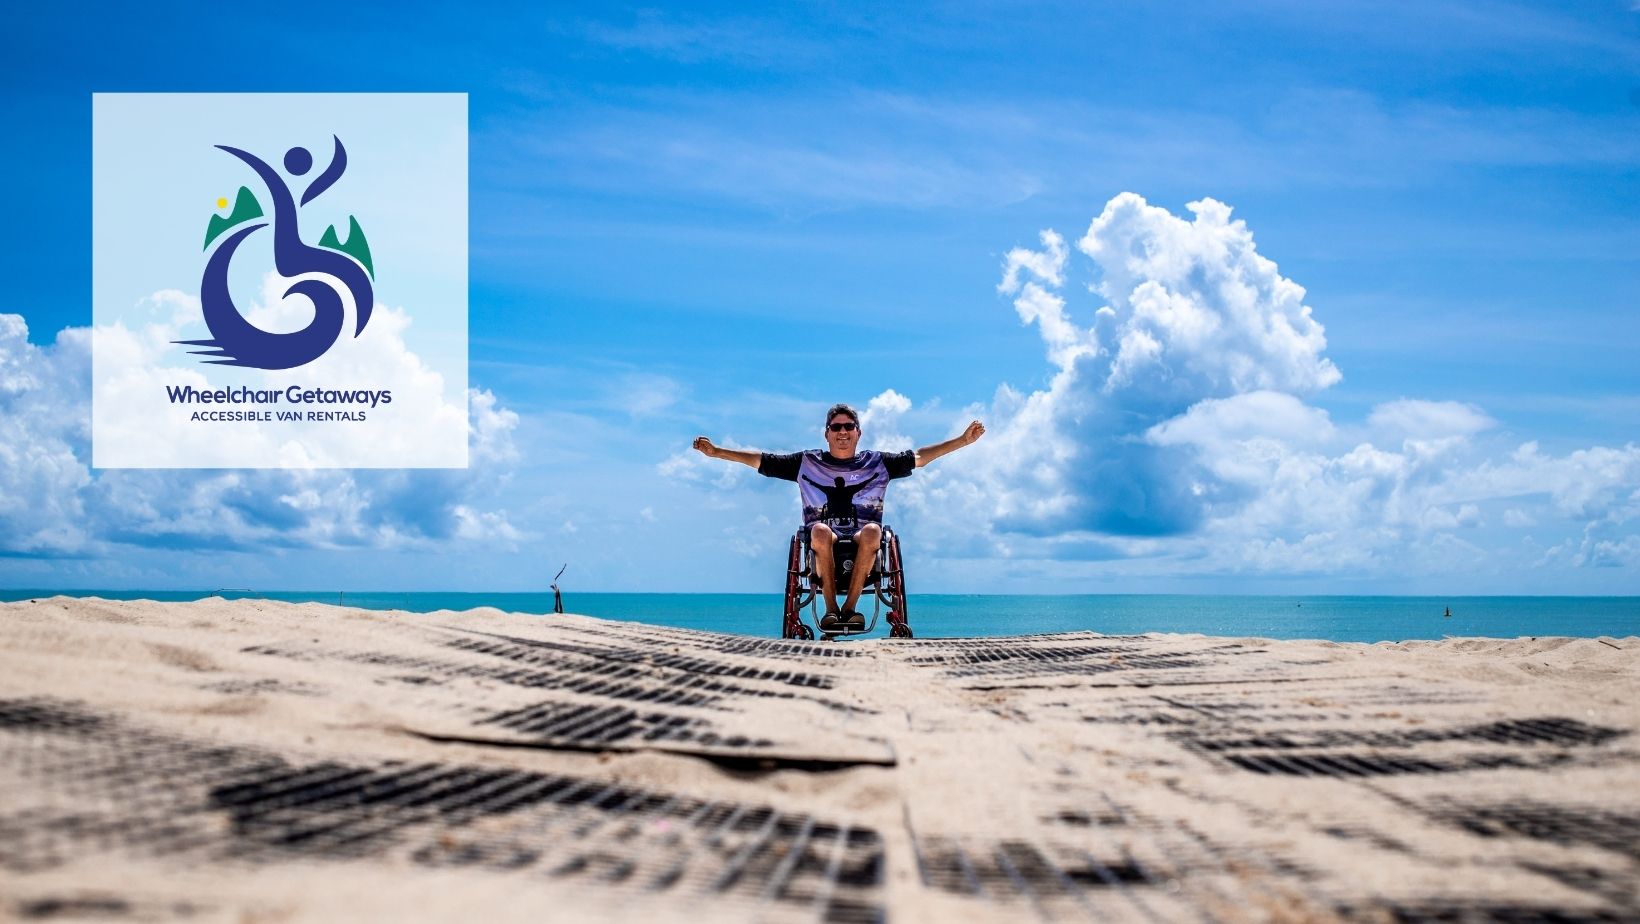 Tour Companies Dedicated for Wheelchair Travel